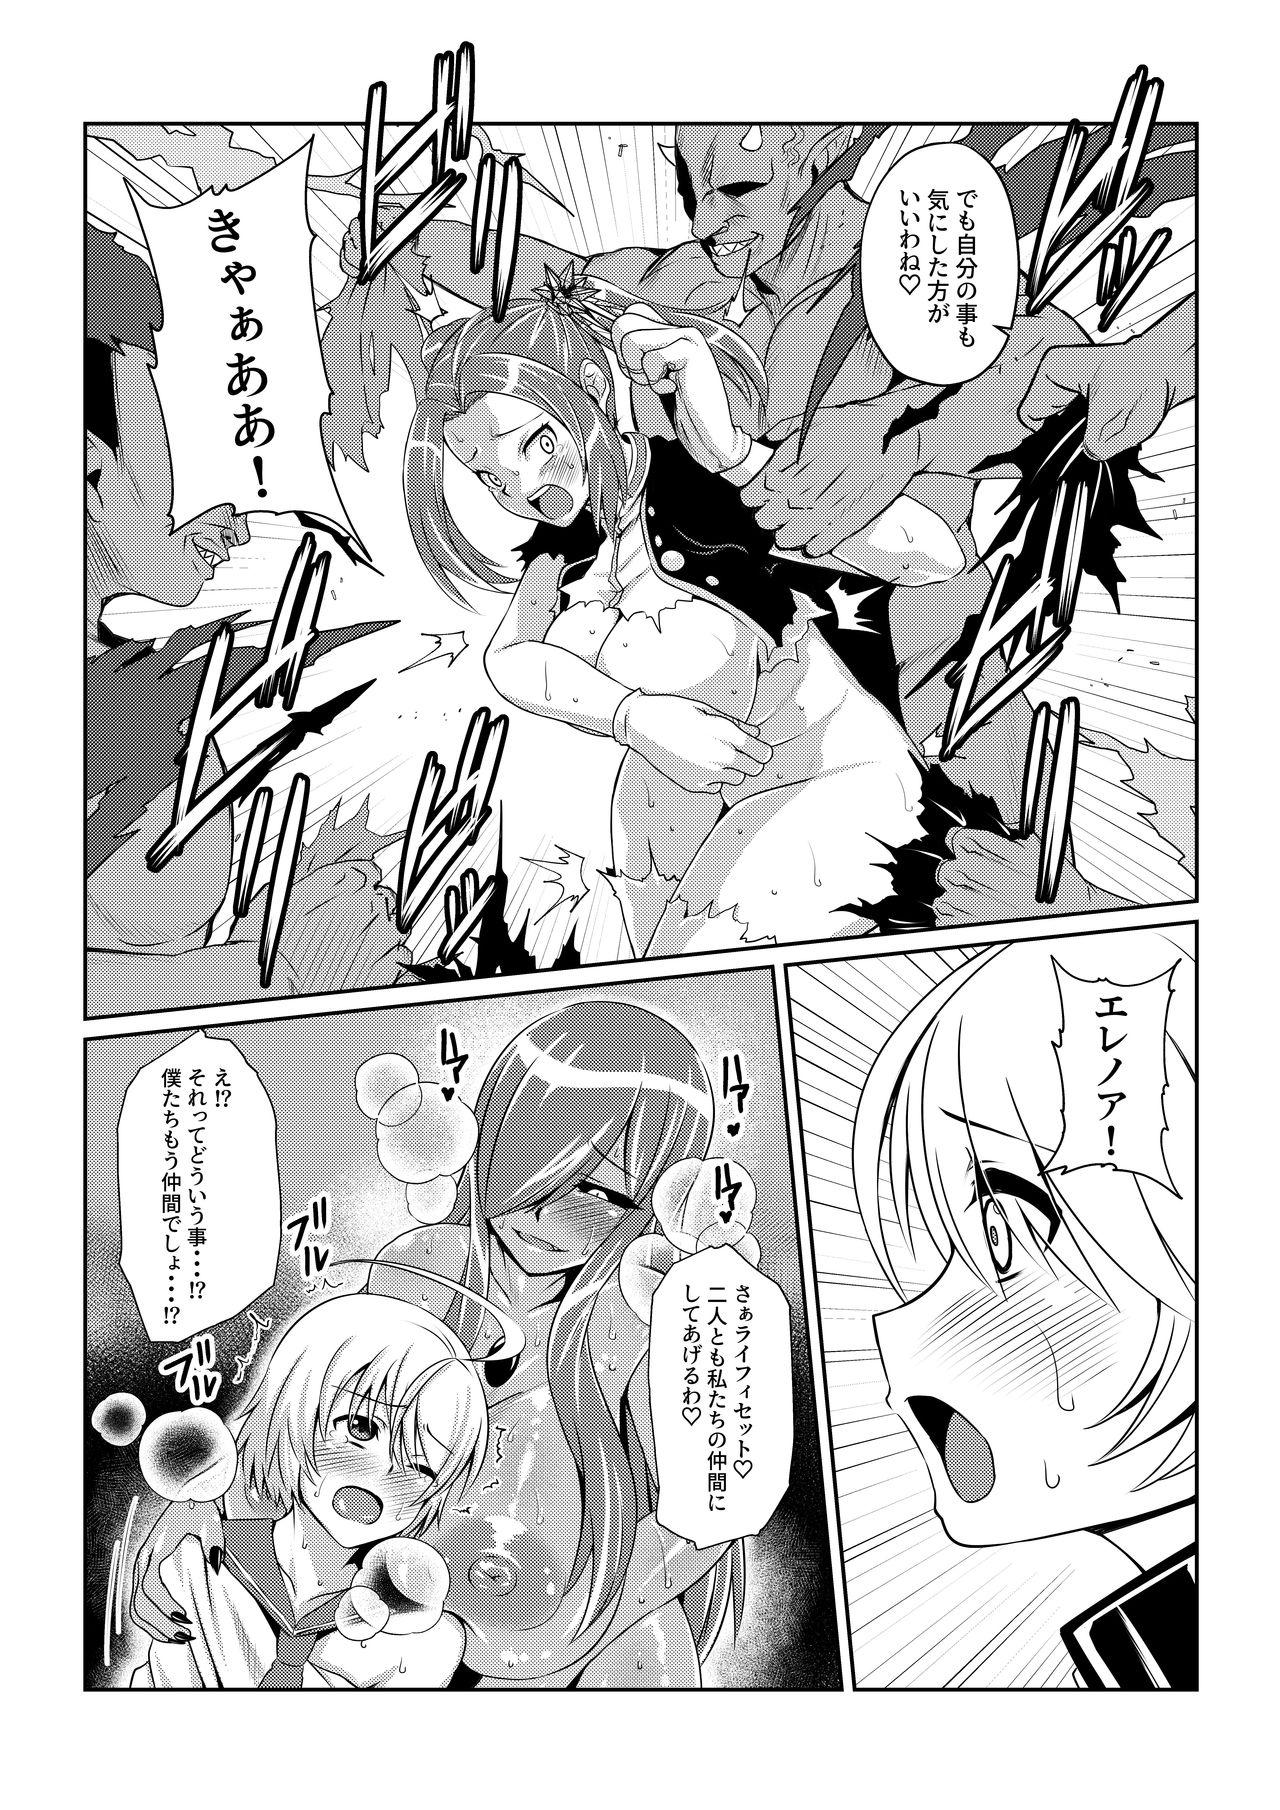 Free Blowjob Tales Of DarkSide〜性隷〜 - Tales of Glory Hole - Page 6